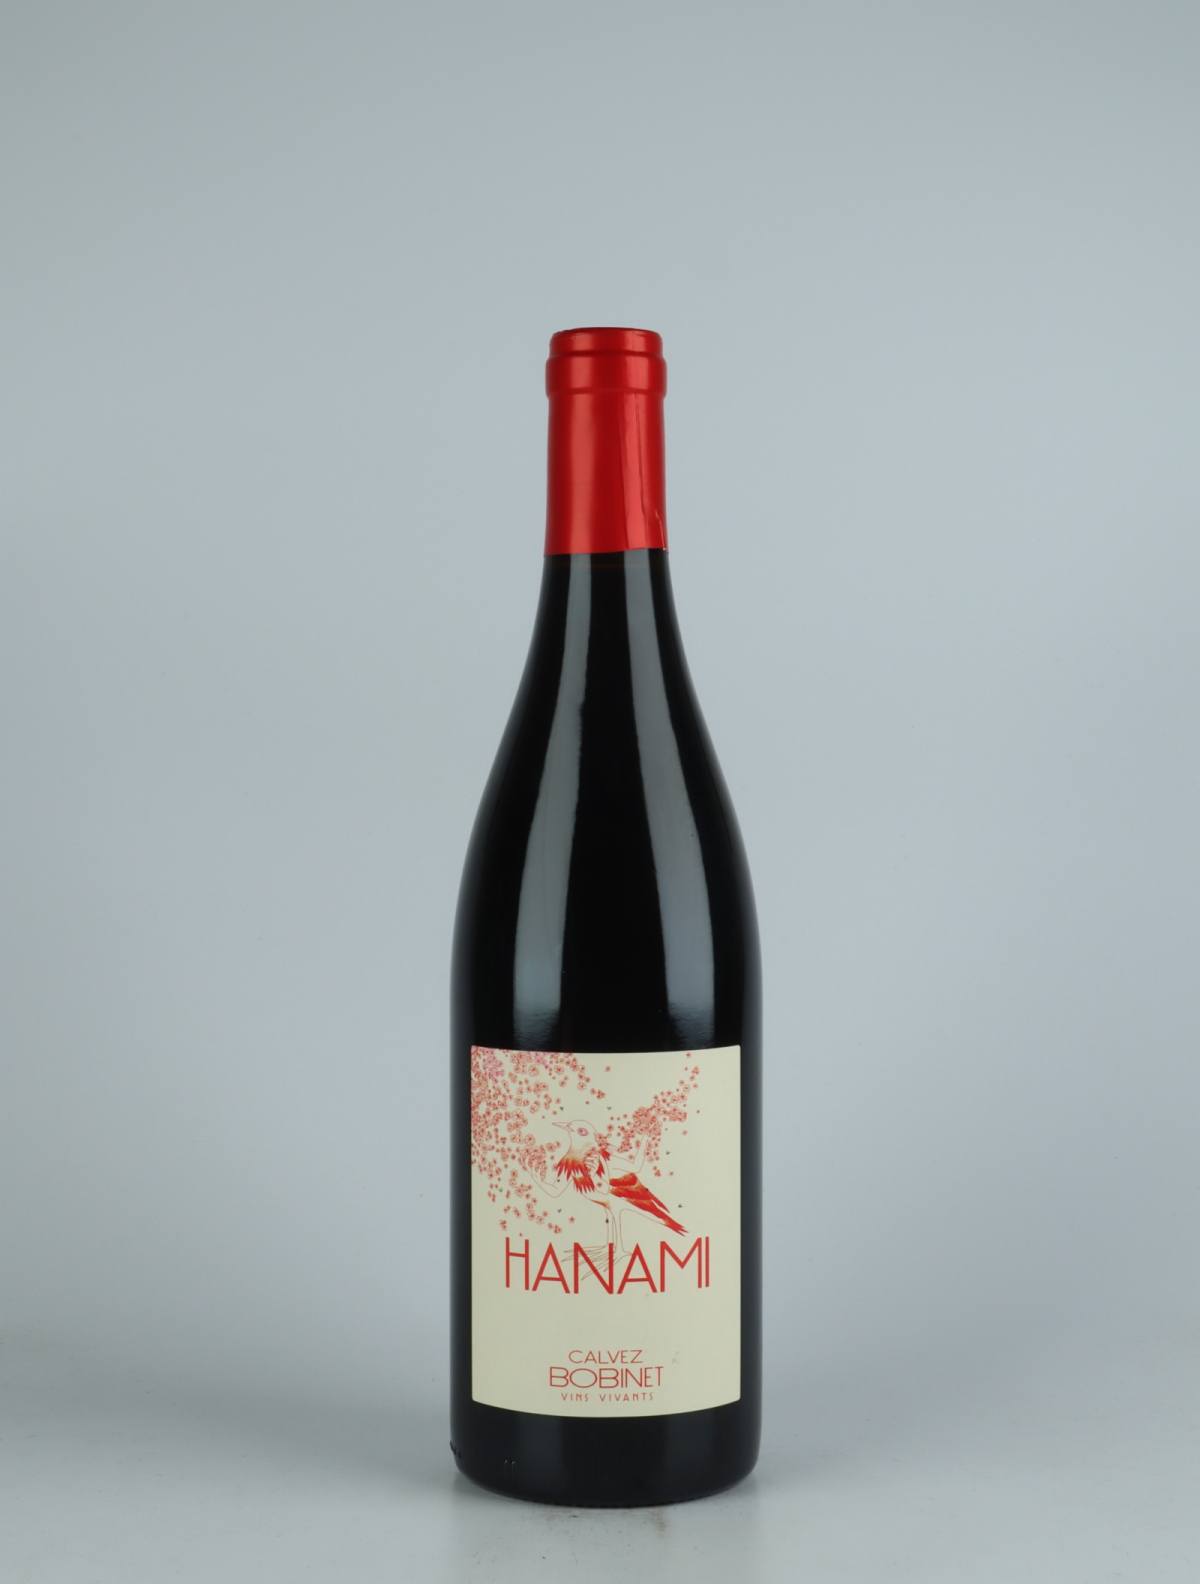 A bottle 2021 Saumur Rouge - Hanami Red wine from Domaine Bobinet, Loire in France